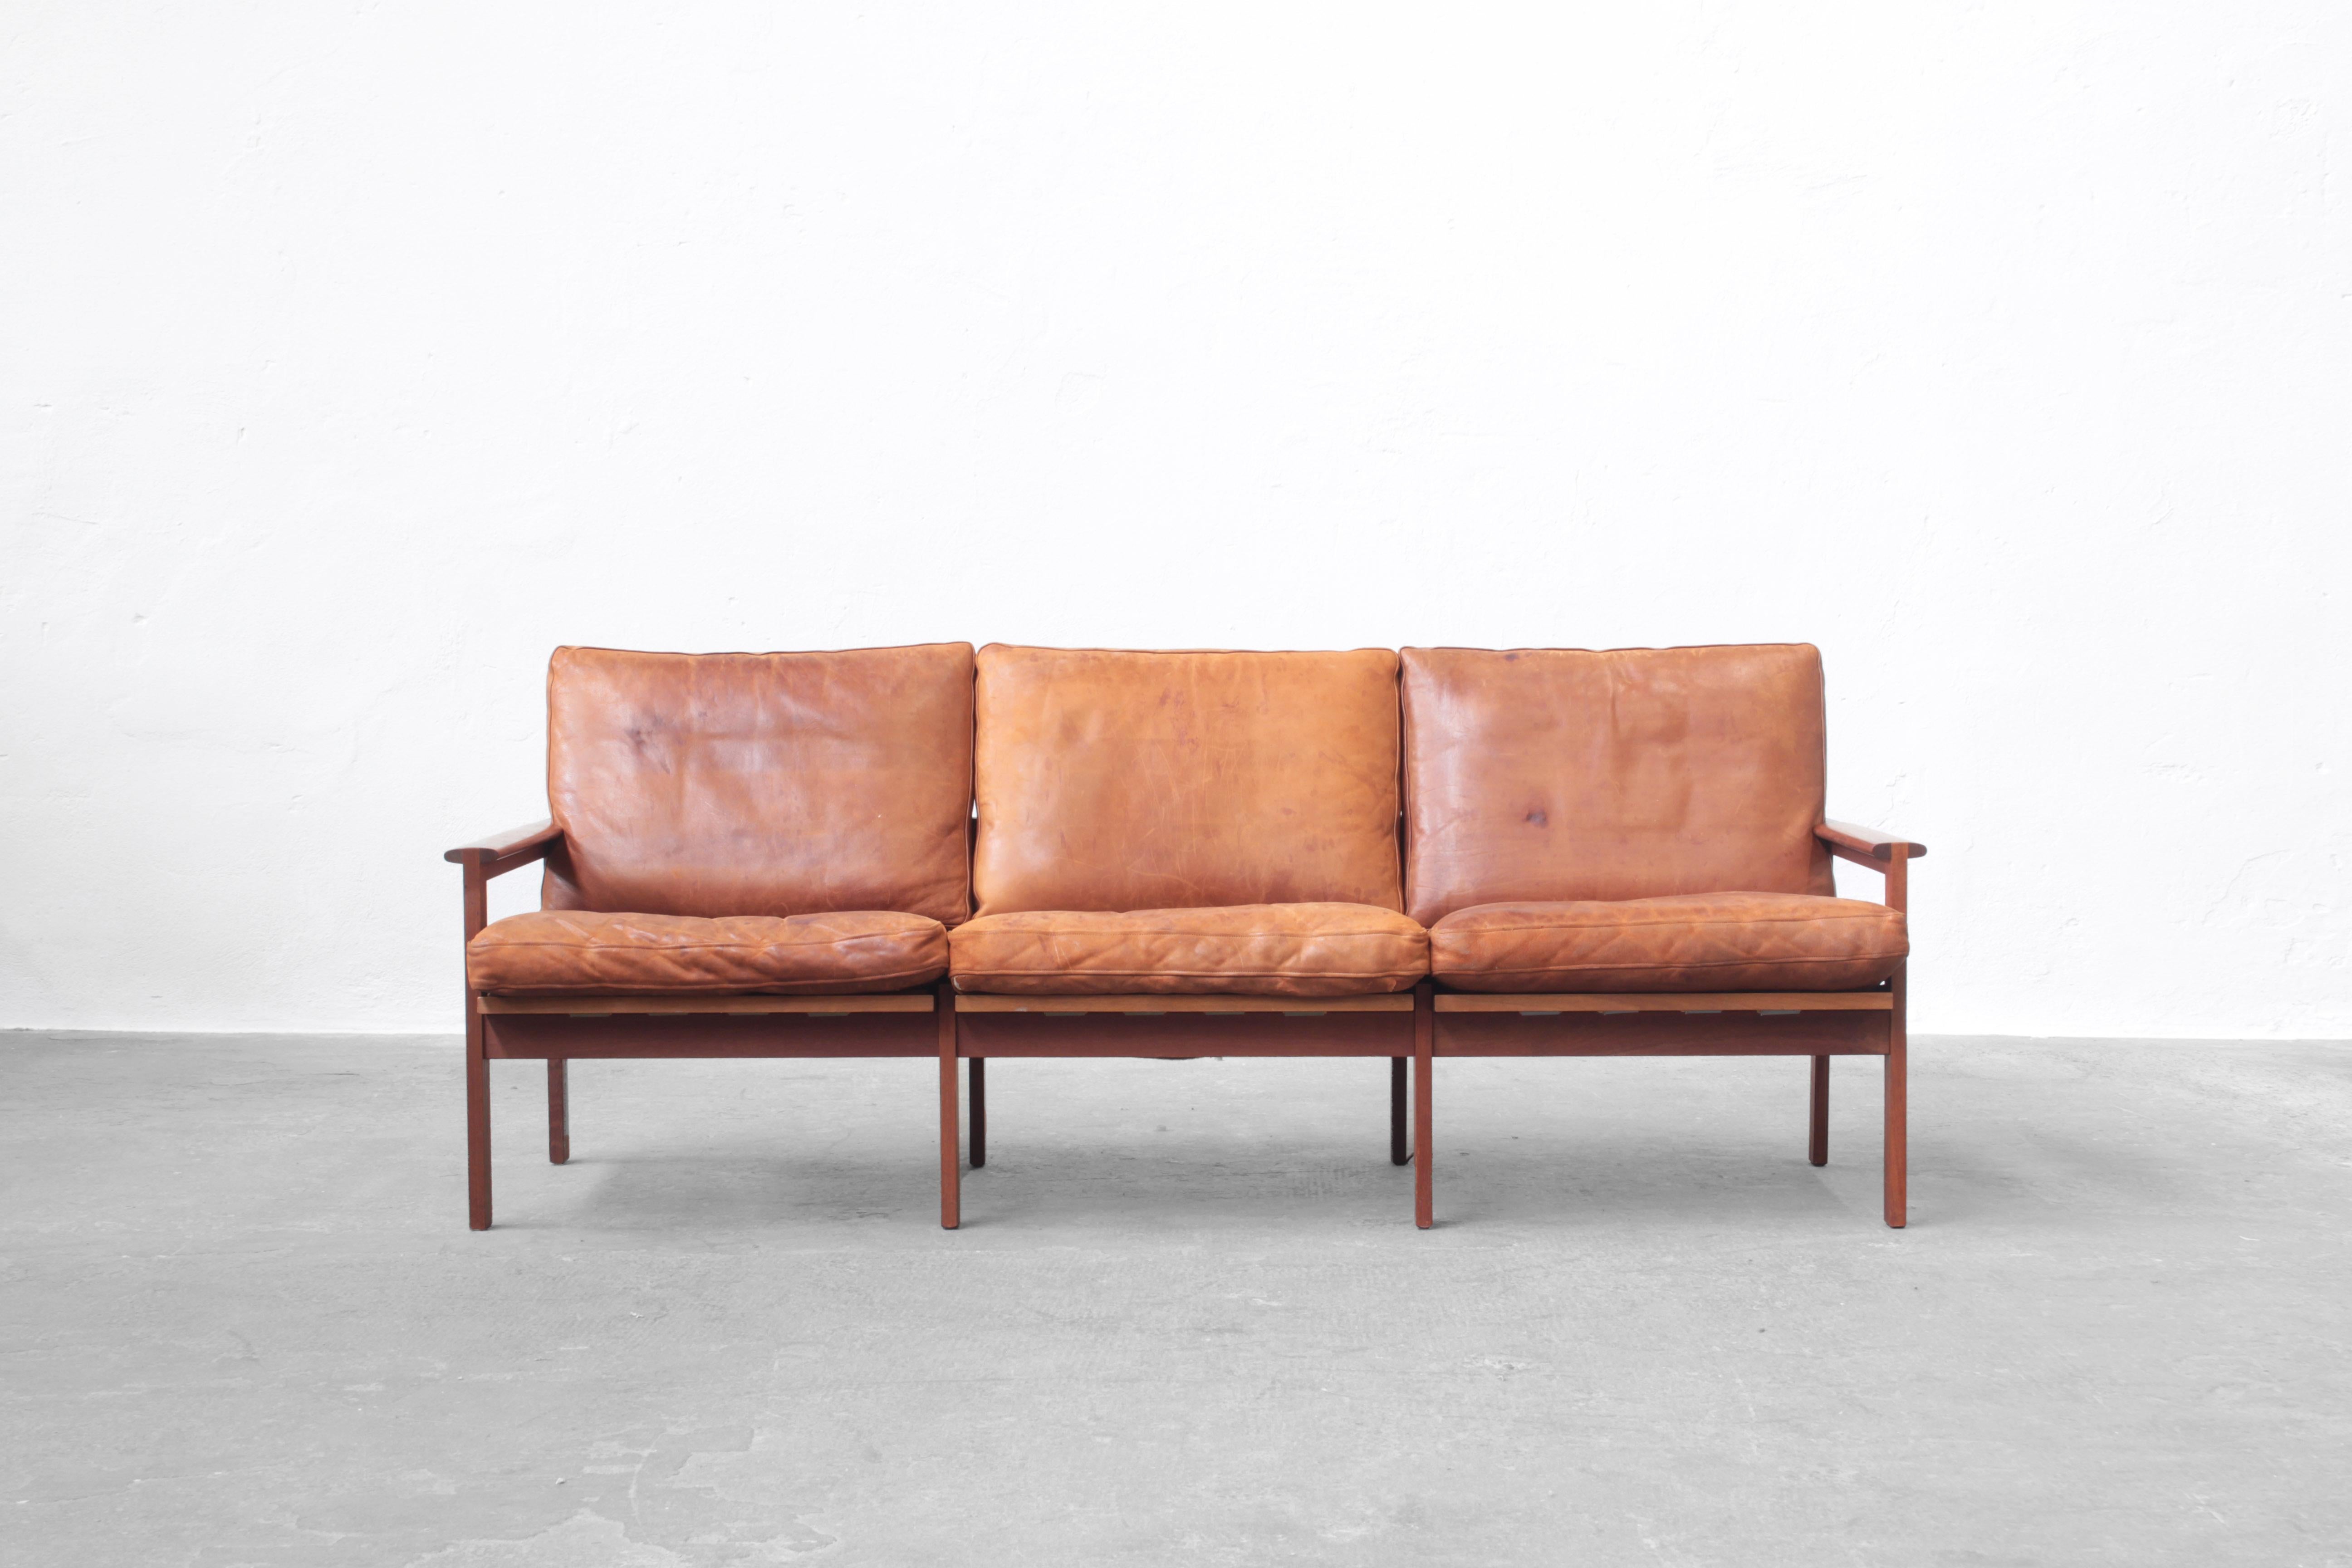 Very beautiful pair sofa designed by Illum Wikkelsø for Niels Eilersen.
The sofa come with brown-cognac leather and teak wood. The sofa is in a good vintage condition. 

 